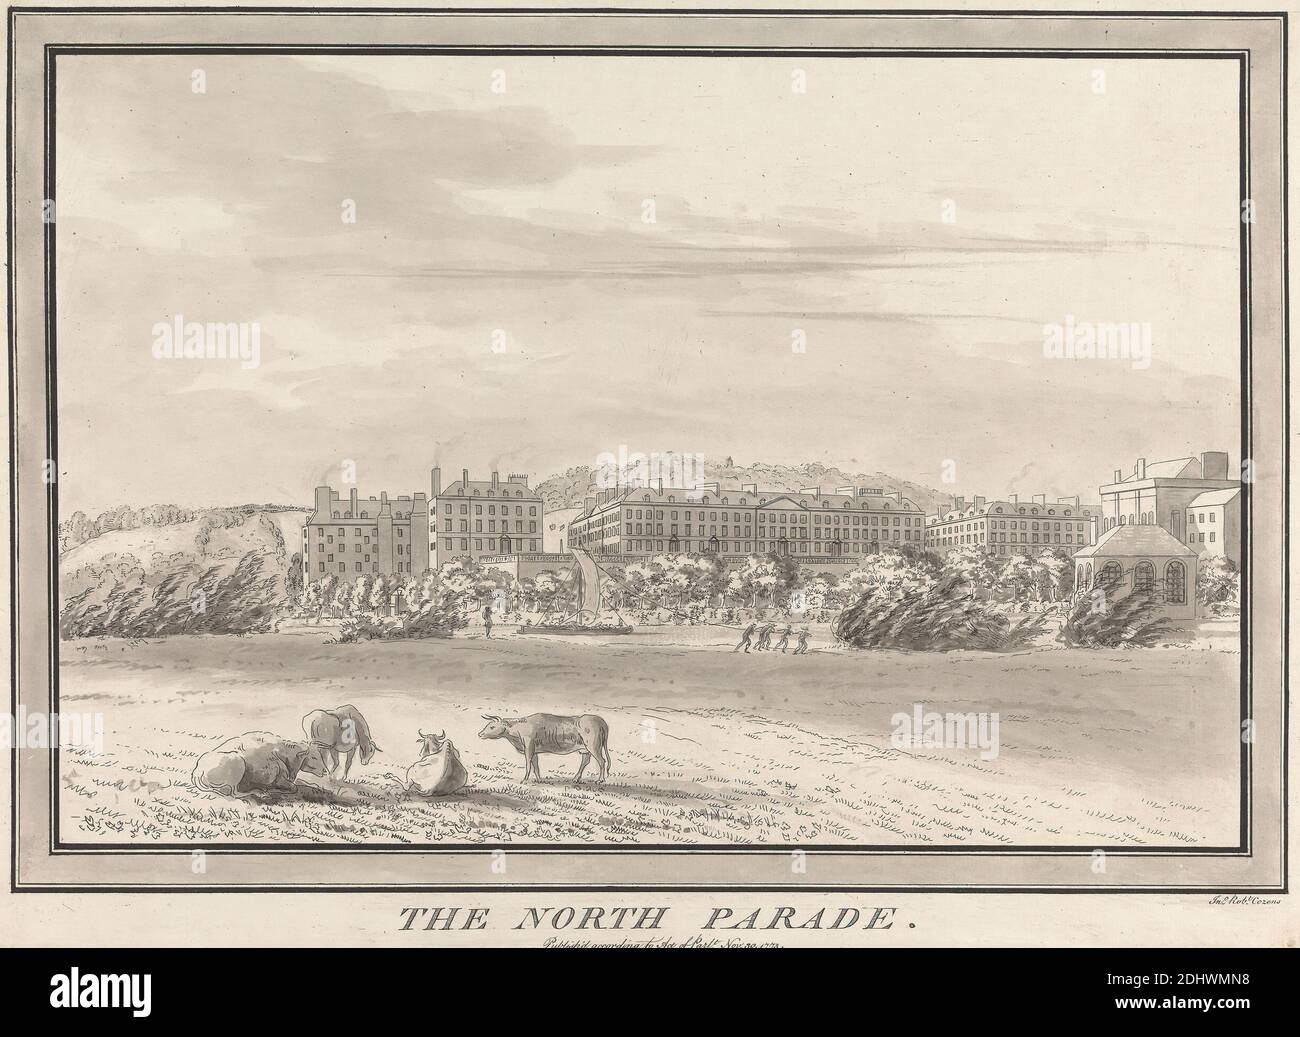 Bath: The North Parade, Print made by John Robert Cozens, 1752–1797, British, 1773, Etching, hand colored with gray wash on moderately thick, slightly textured, beige laid paper, Sheet: 10 13/16 x 14 13/16 inches (27.5 x 37.6 cm) and Image: 8 15/16 x 13 7/16 inches (22.7 x 34.1 cm), animal art, architectural subject, buildings, clouds, cows, field, grass, houses, labor, landscape, men, pulling, river, rope, sailboat, smoke, trees, wind, Avon, Bath, Bath and Northeast Somerset, England, North Parade, United Kingdom Stock Photo